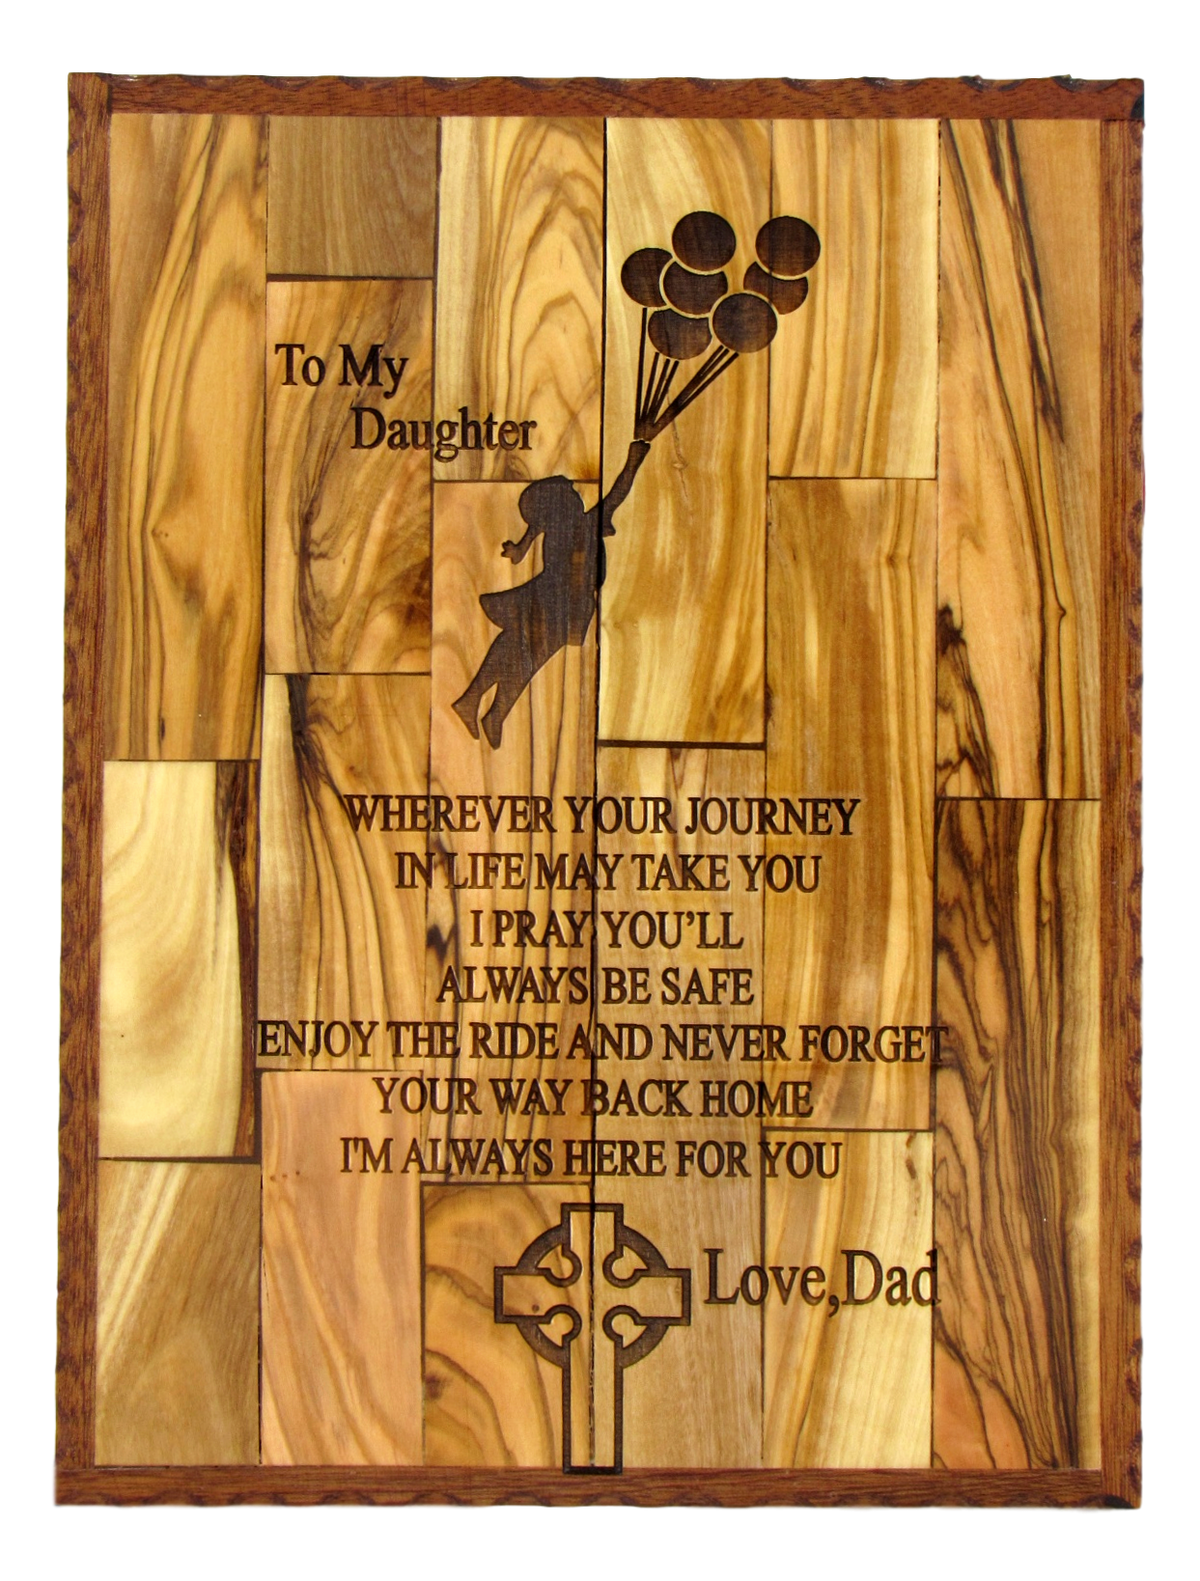 Plaque, "To My Daughter" & "To My Son" Messages